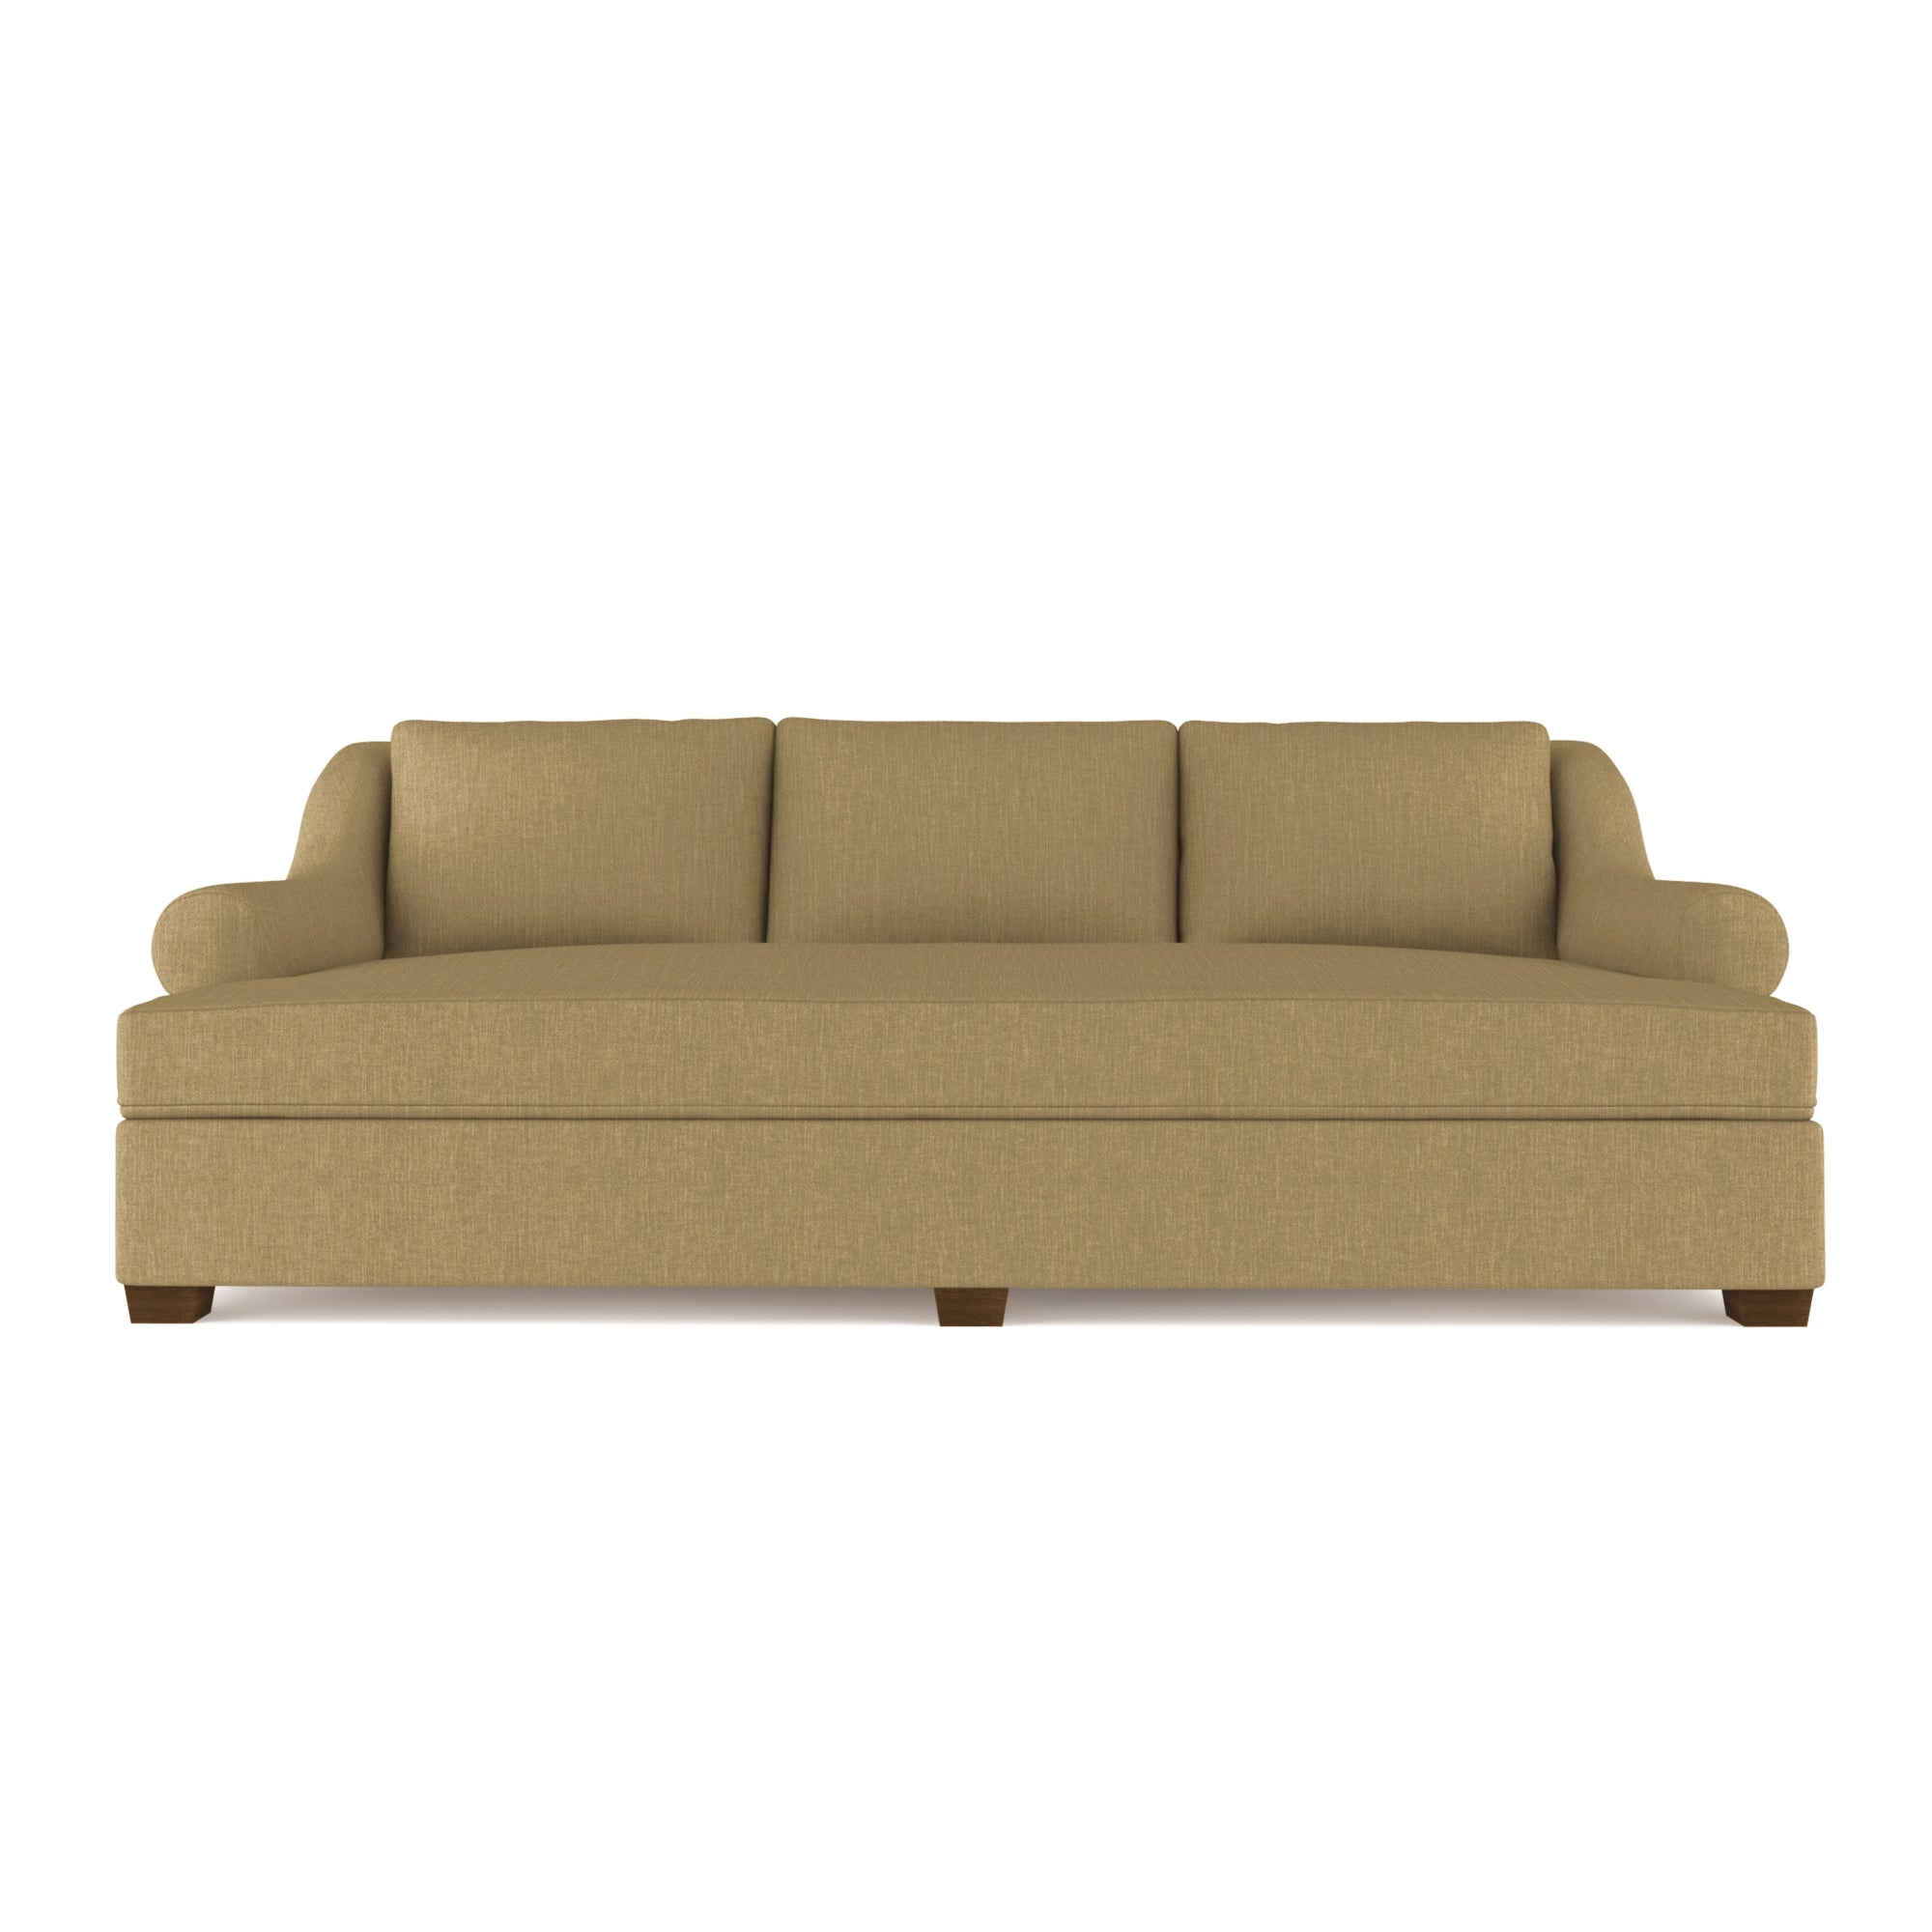 Thompson Daybed - Marzipan Box Weave Linen